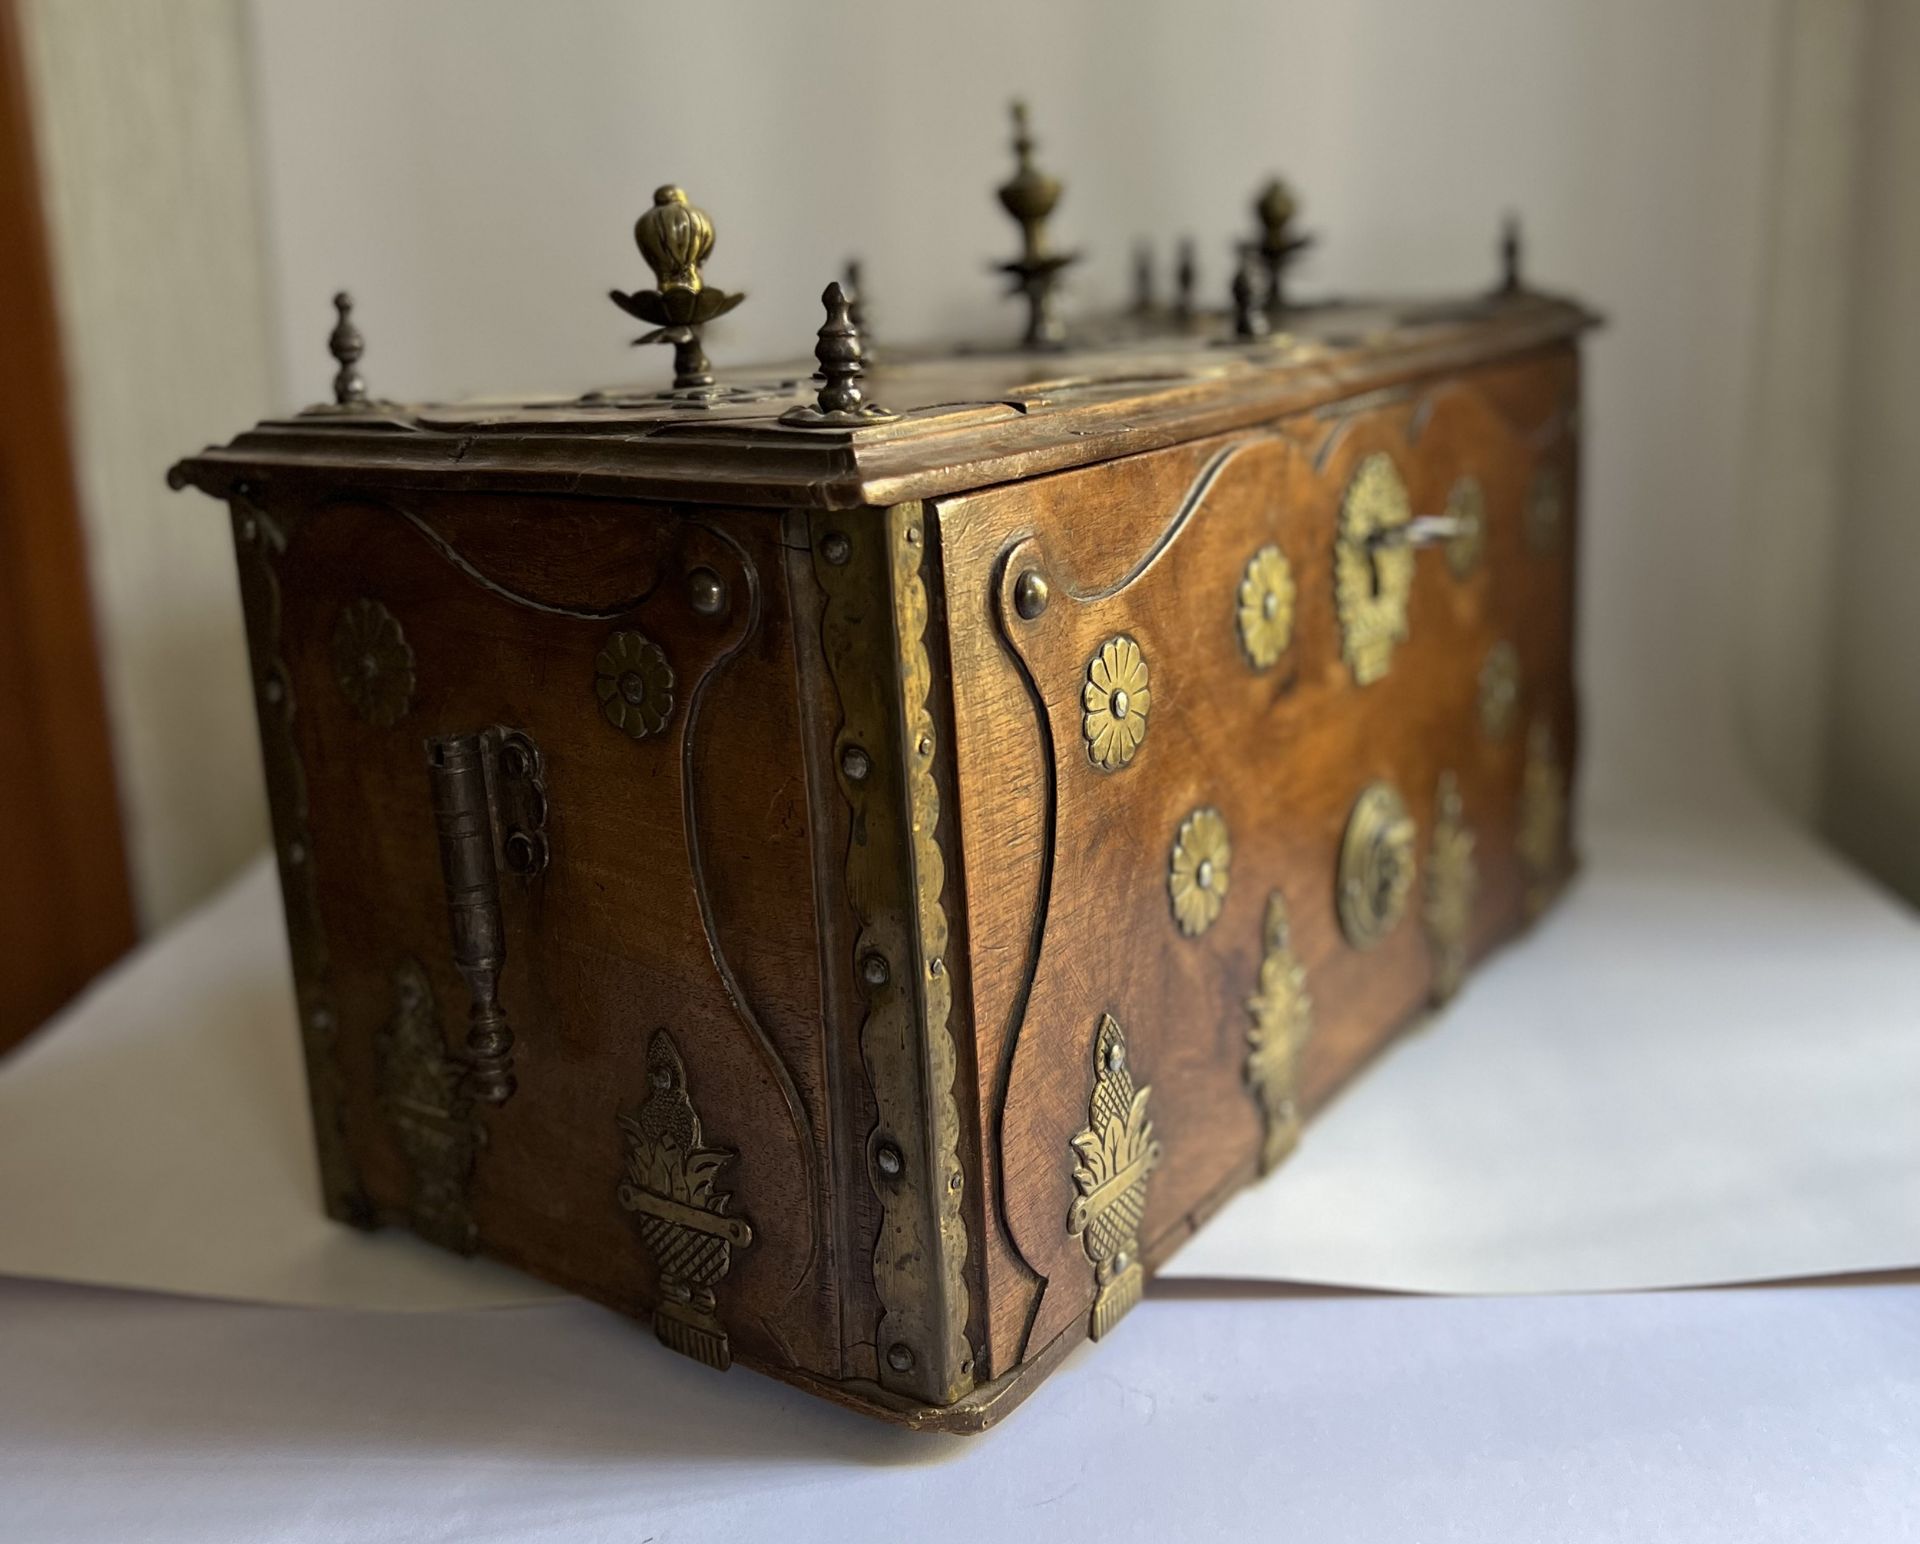 Rare Indian Colonial chest in teak and Bronze Pavilion appliqués, Gujarat, 18th century - Image 5 of 8